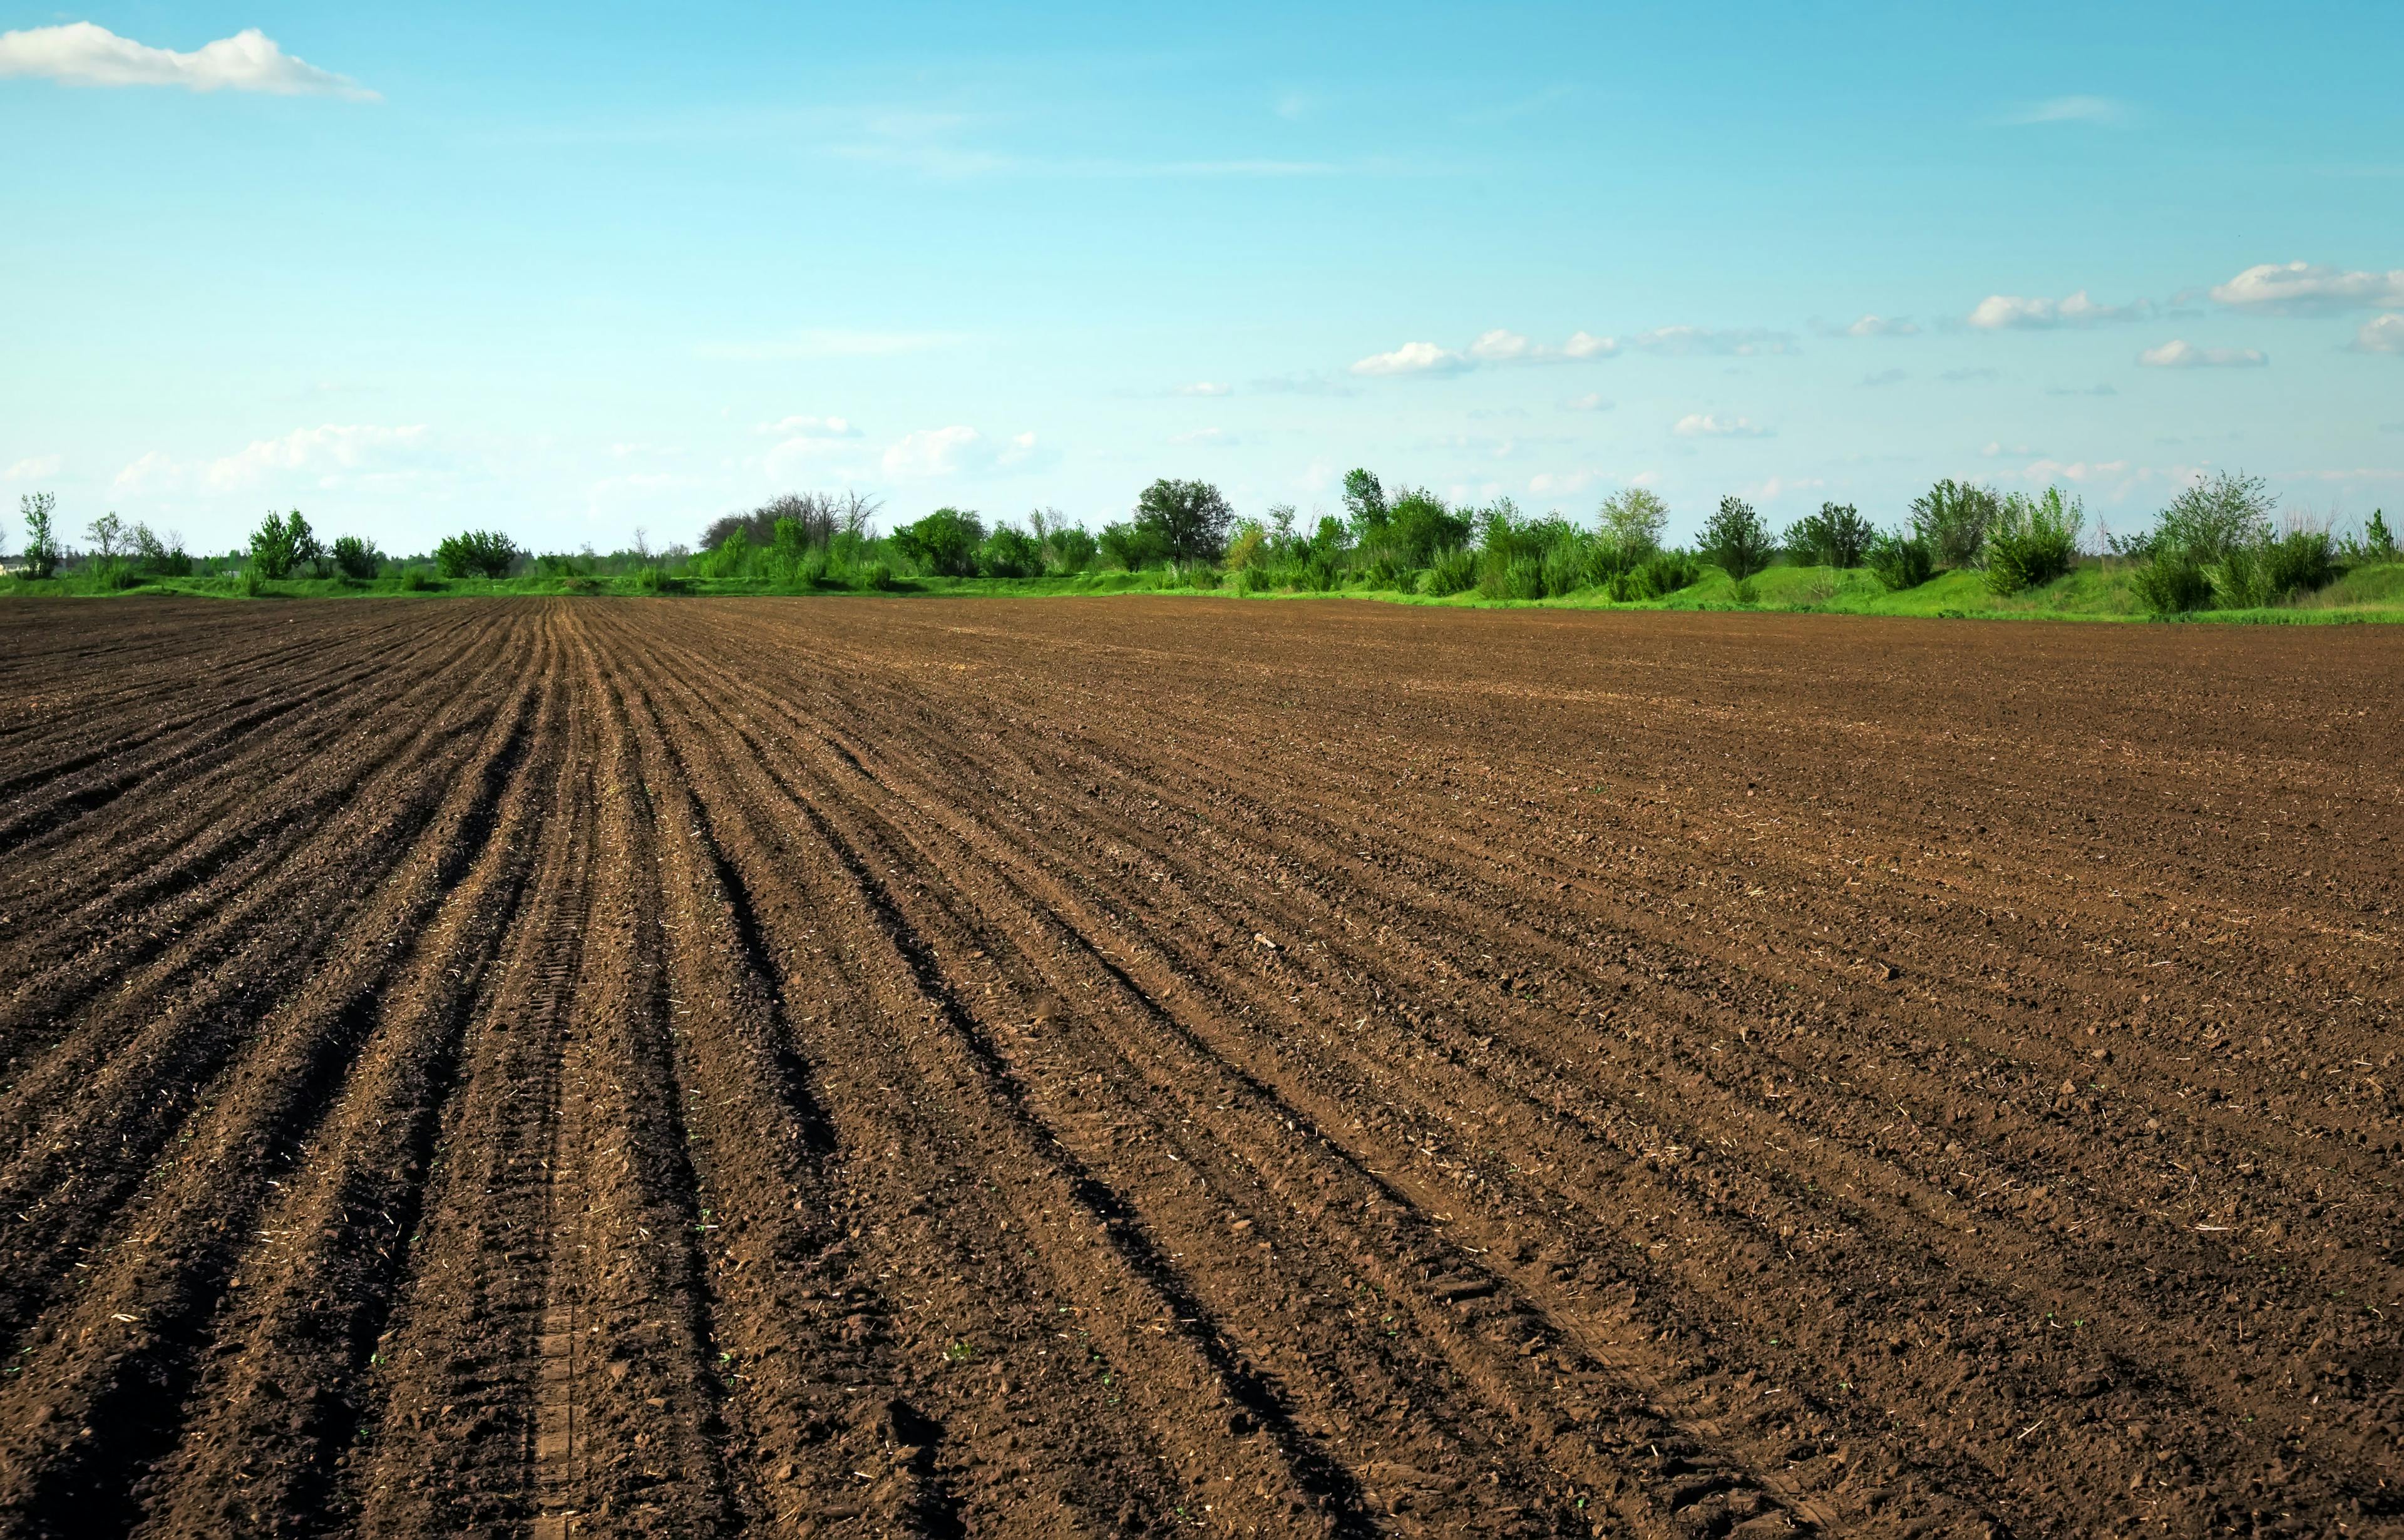 Preparing field for planting. Plowed soil in spring time with two tubes and blue sky. | Image Credit: © es0lex - stock.adobe.com